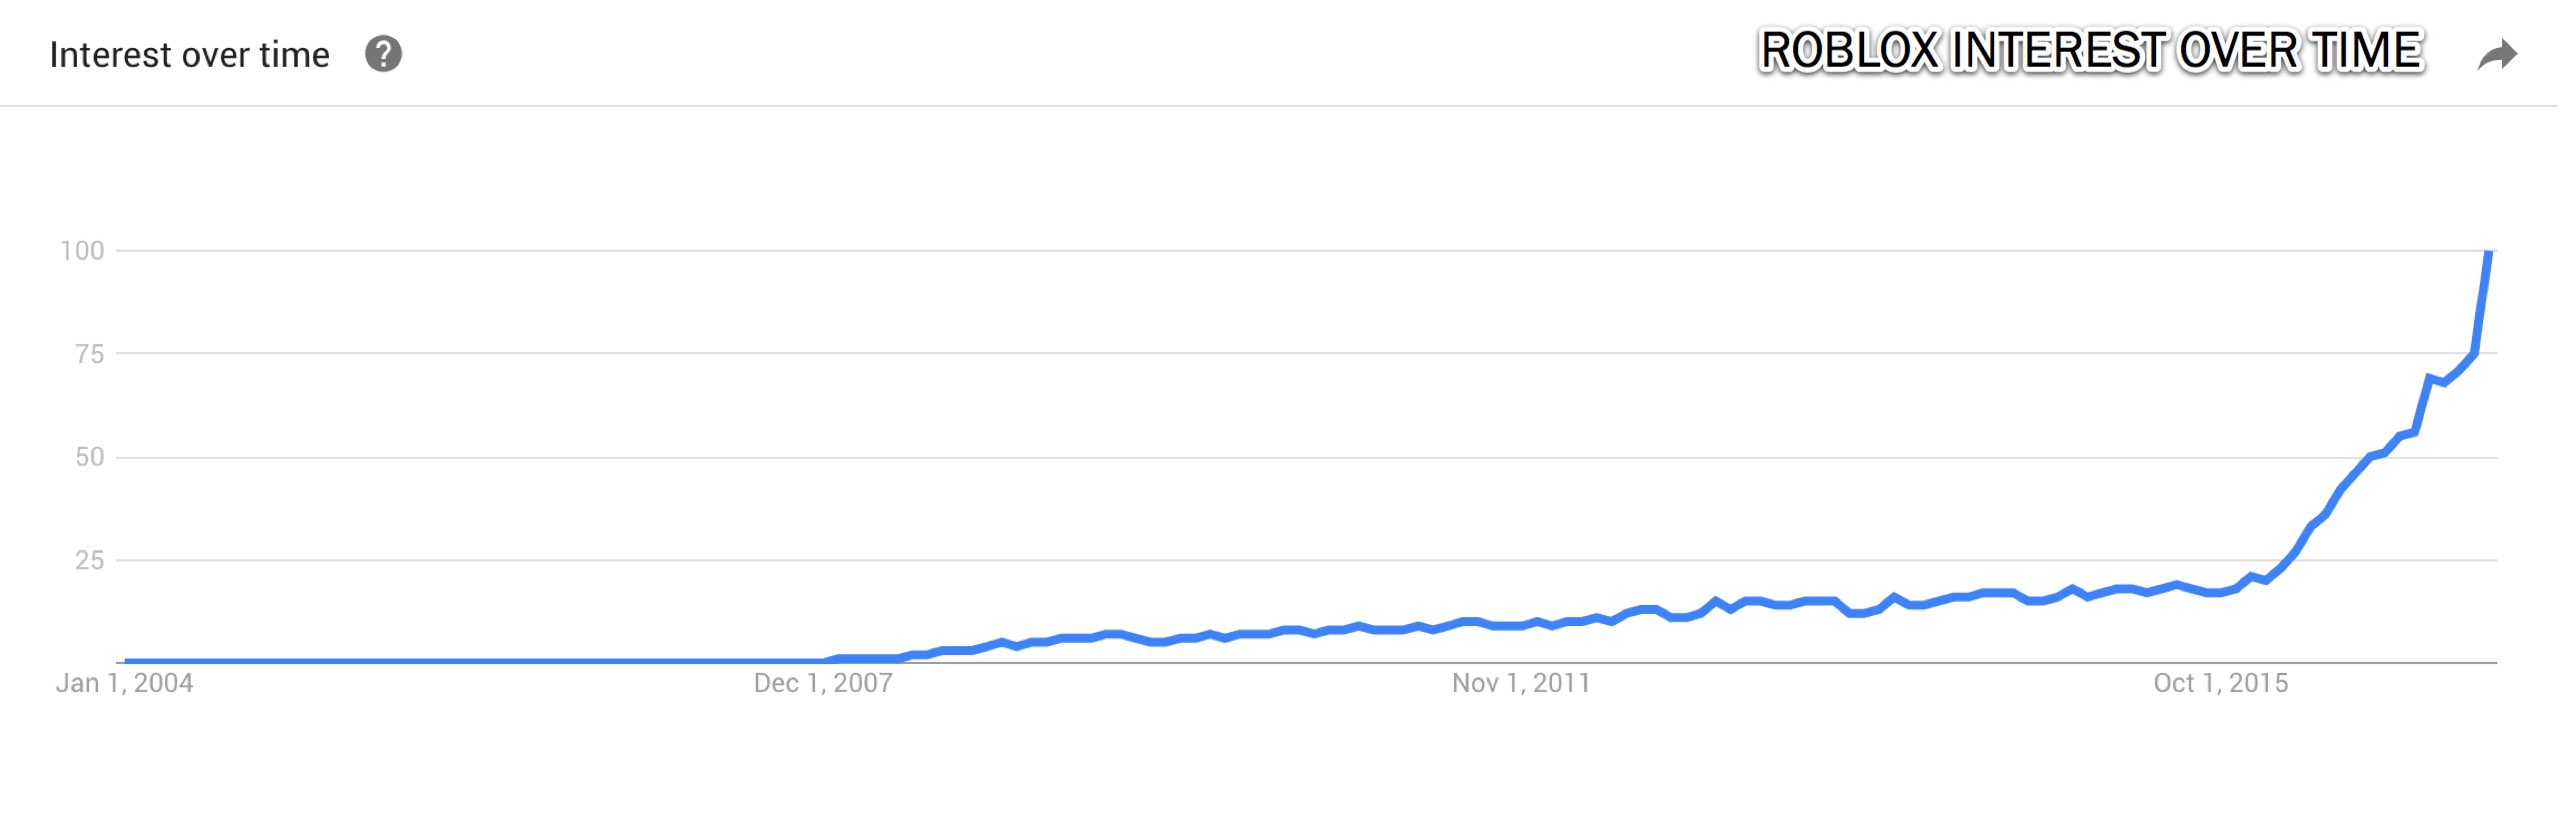 Roblox Interest Over Time